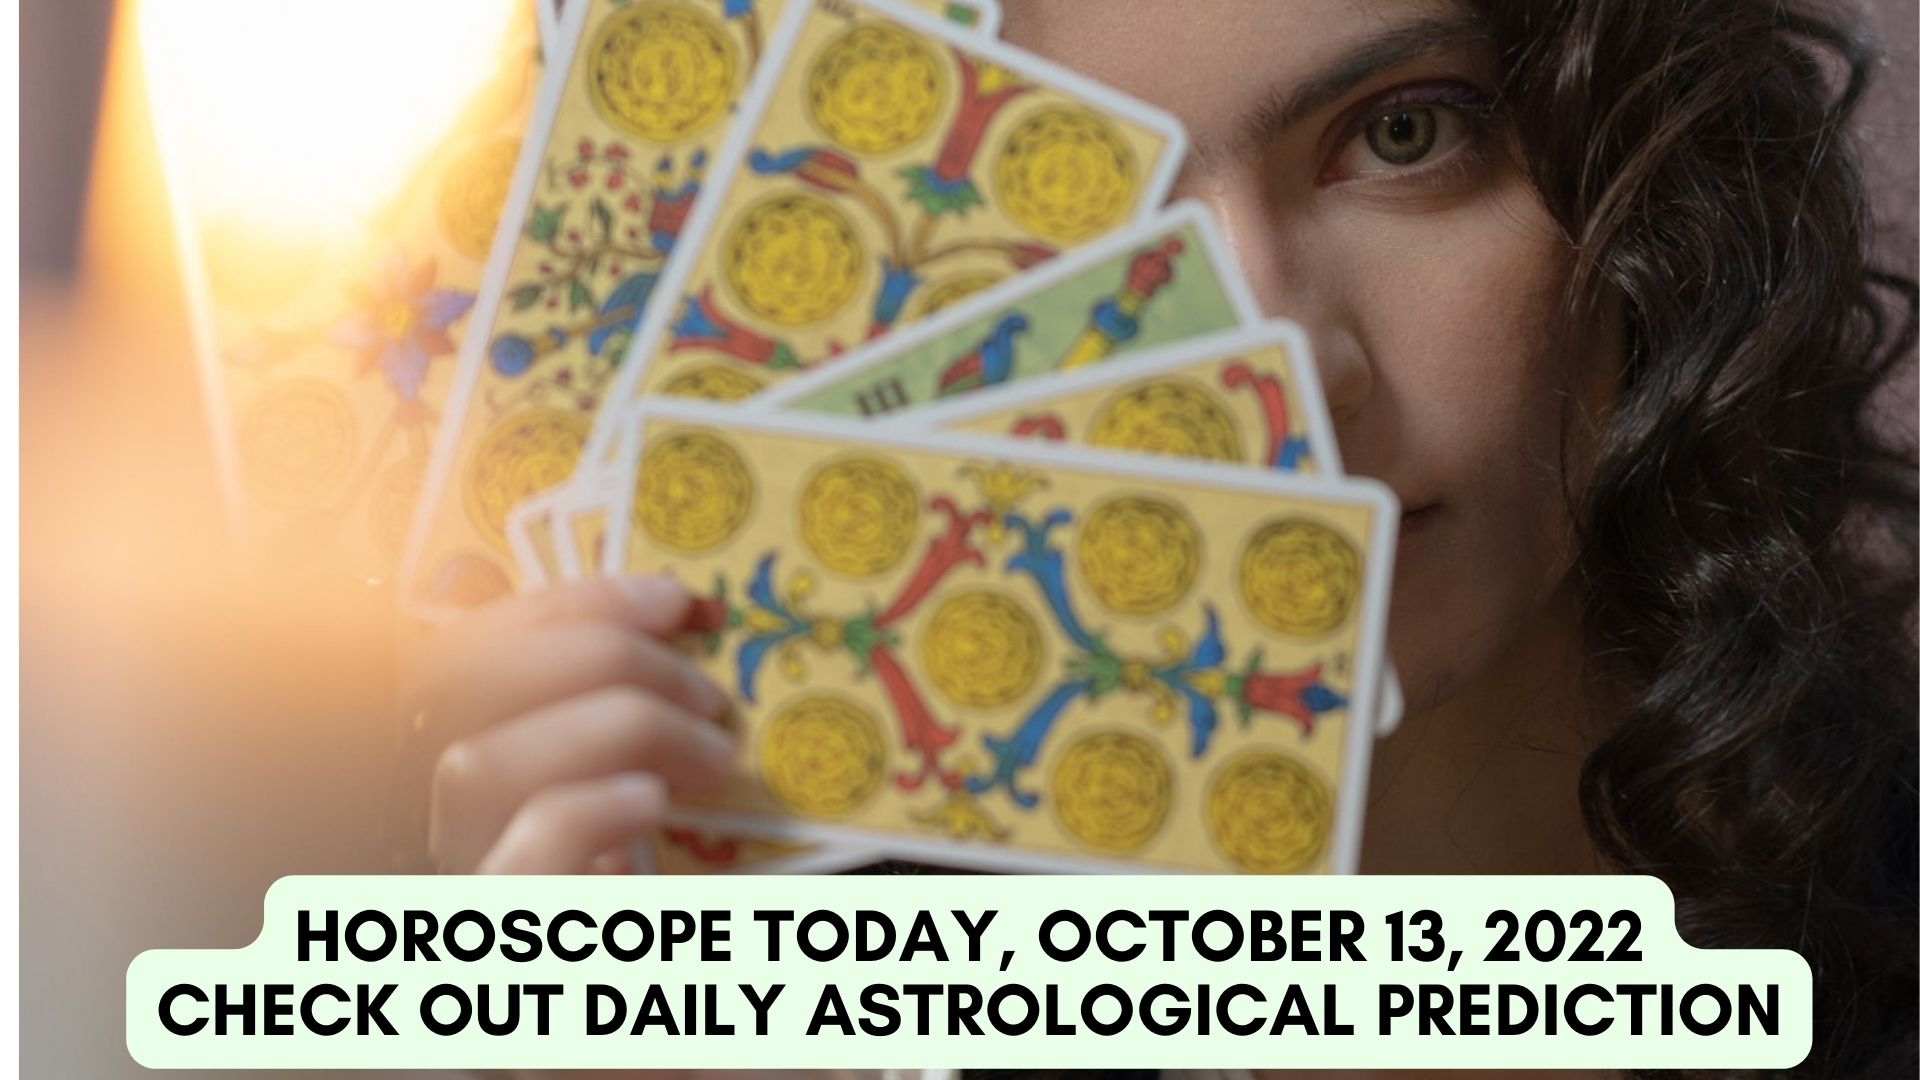 Horoscope Today, October 13, 2022 - Check Out Daily Astrological Prediction